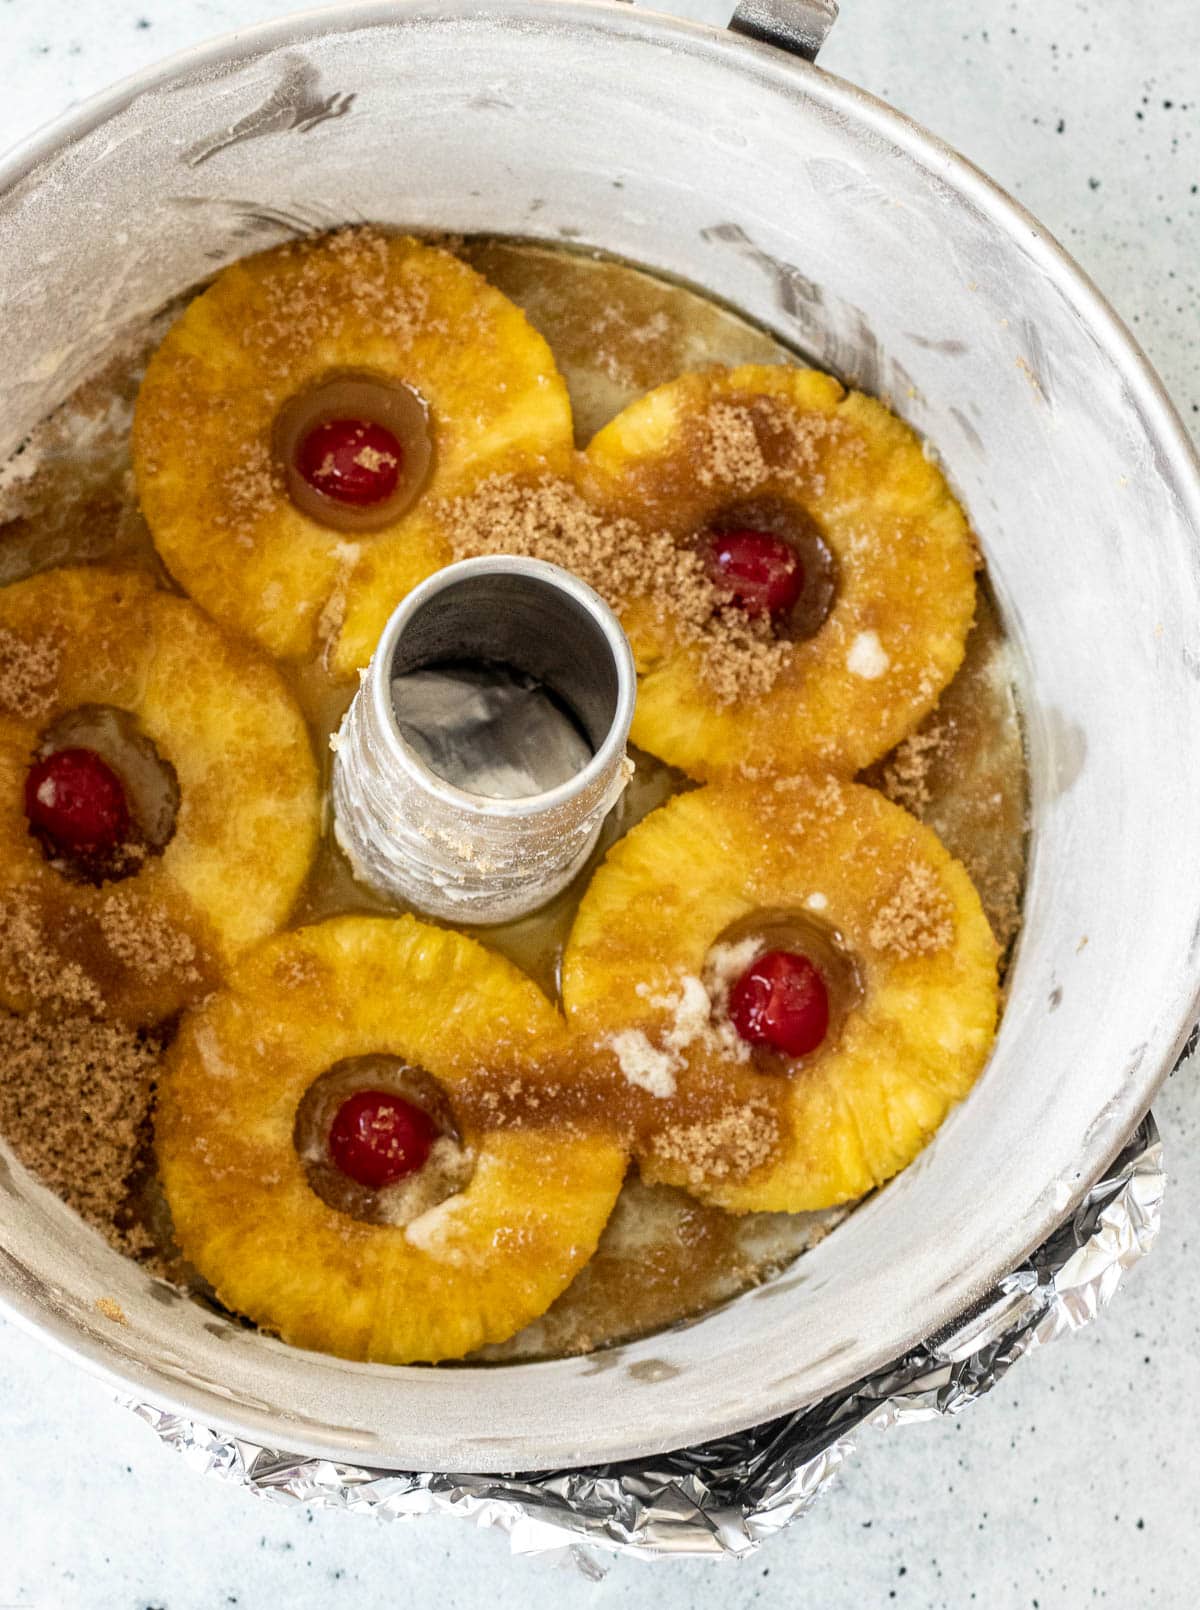 Baking pan covered at the bottom with pineapple rings, maraschino cherries, brown sugar and melted butter.